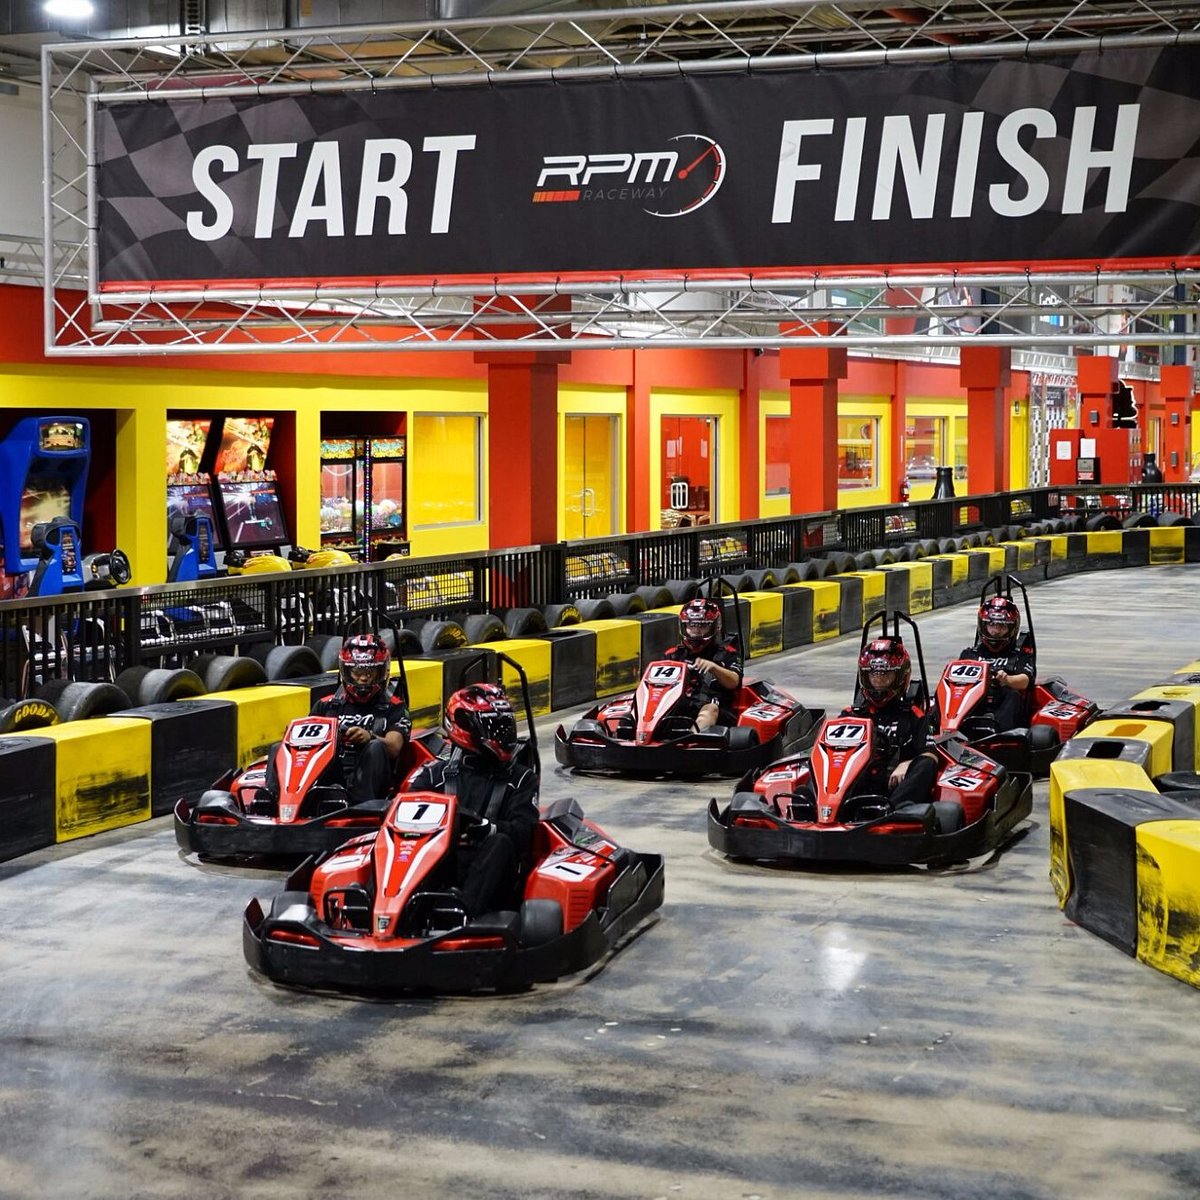 Galleria Mall to add indoor kart track, arcade and game center